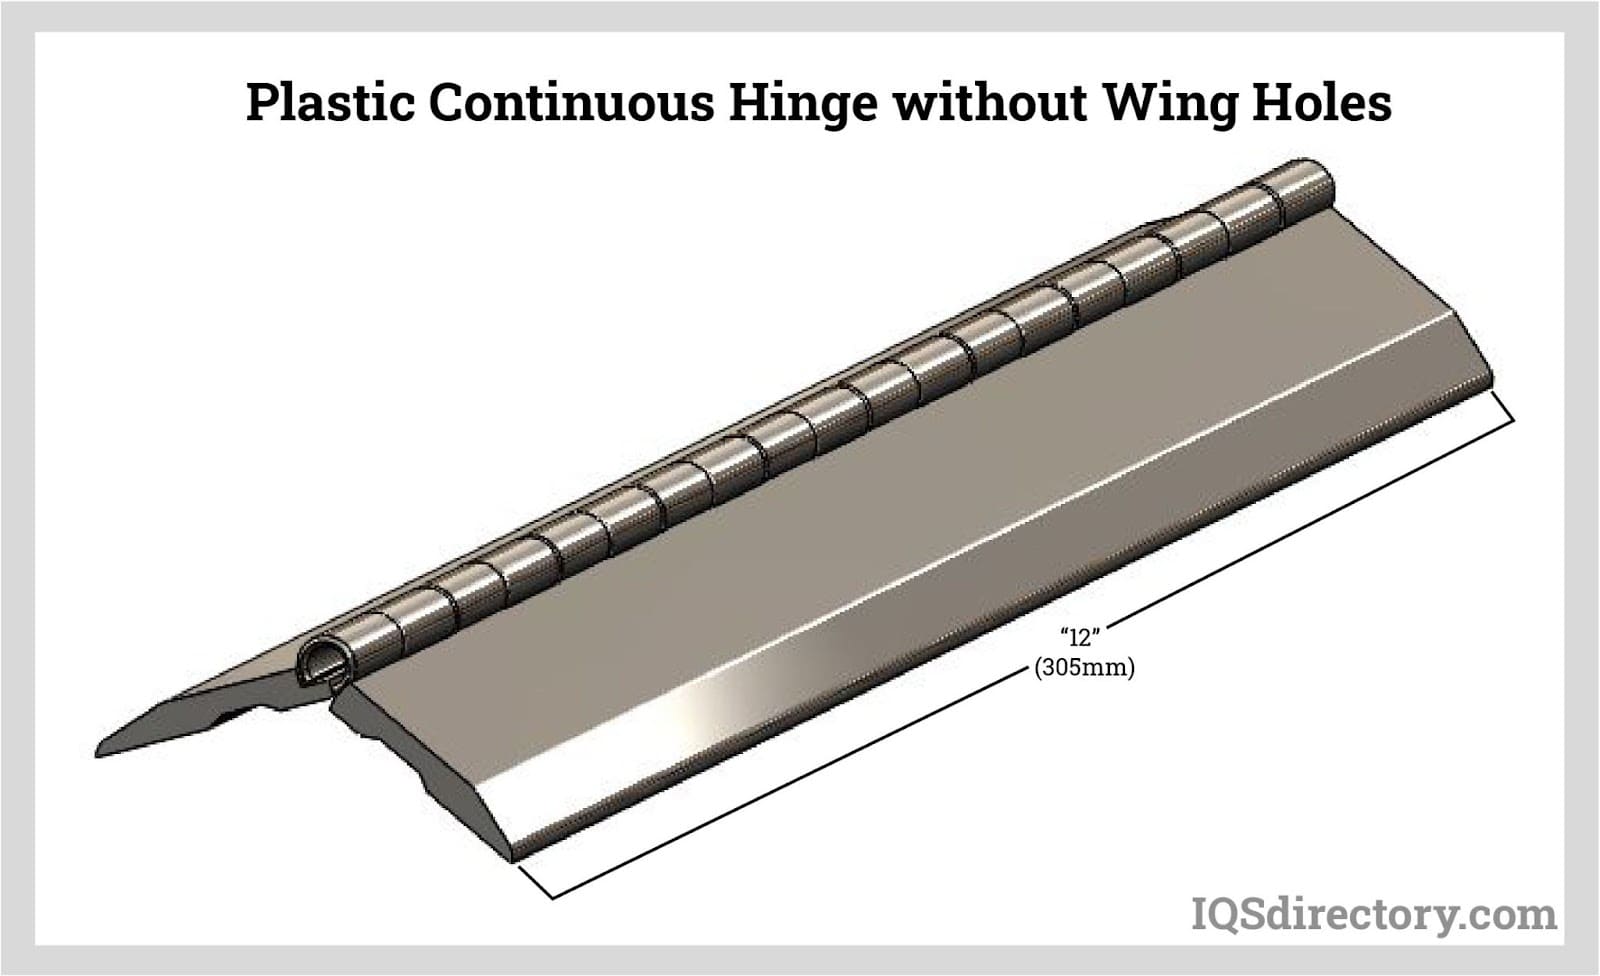 Plastic Continuous Hinge without Wing Holes